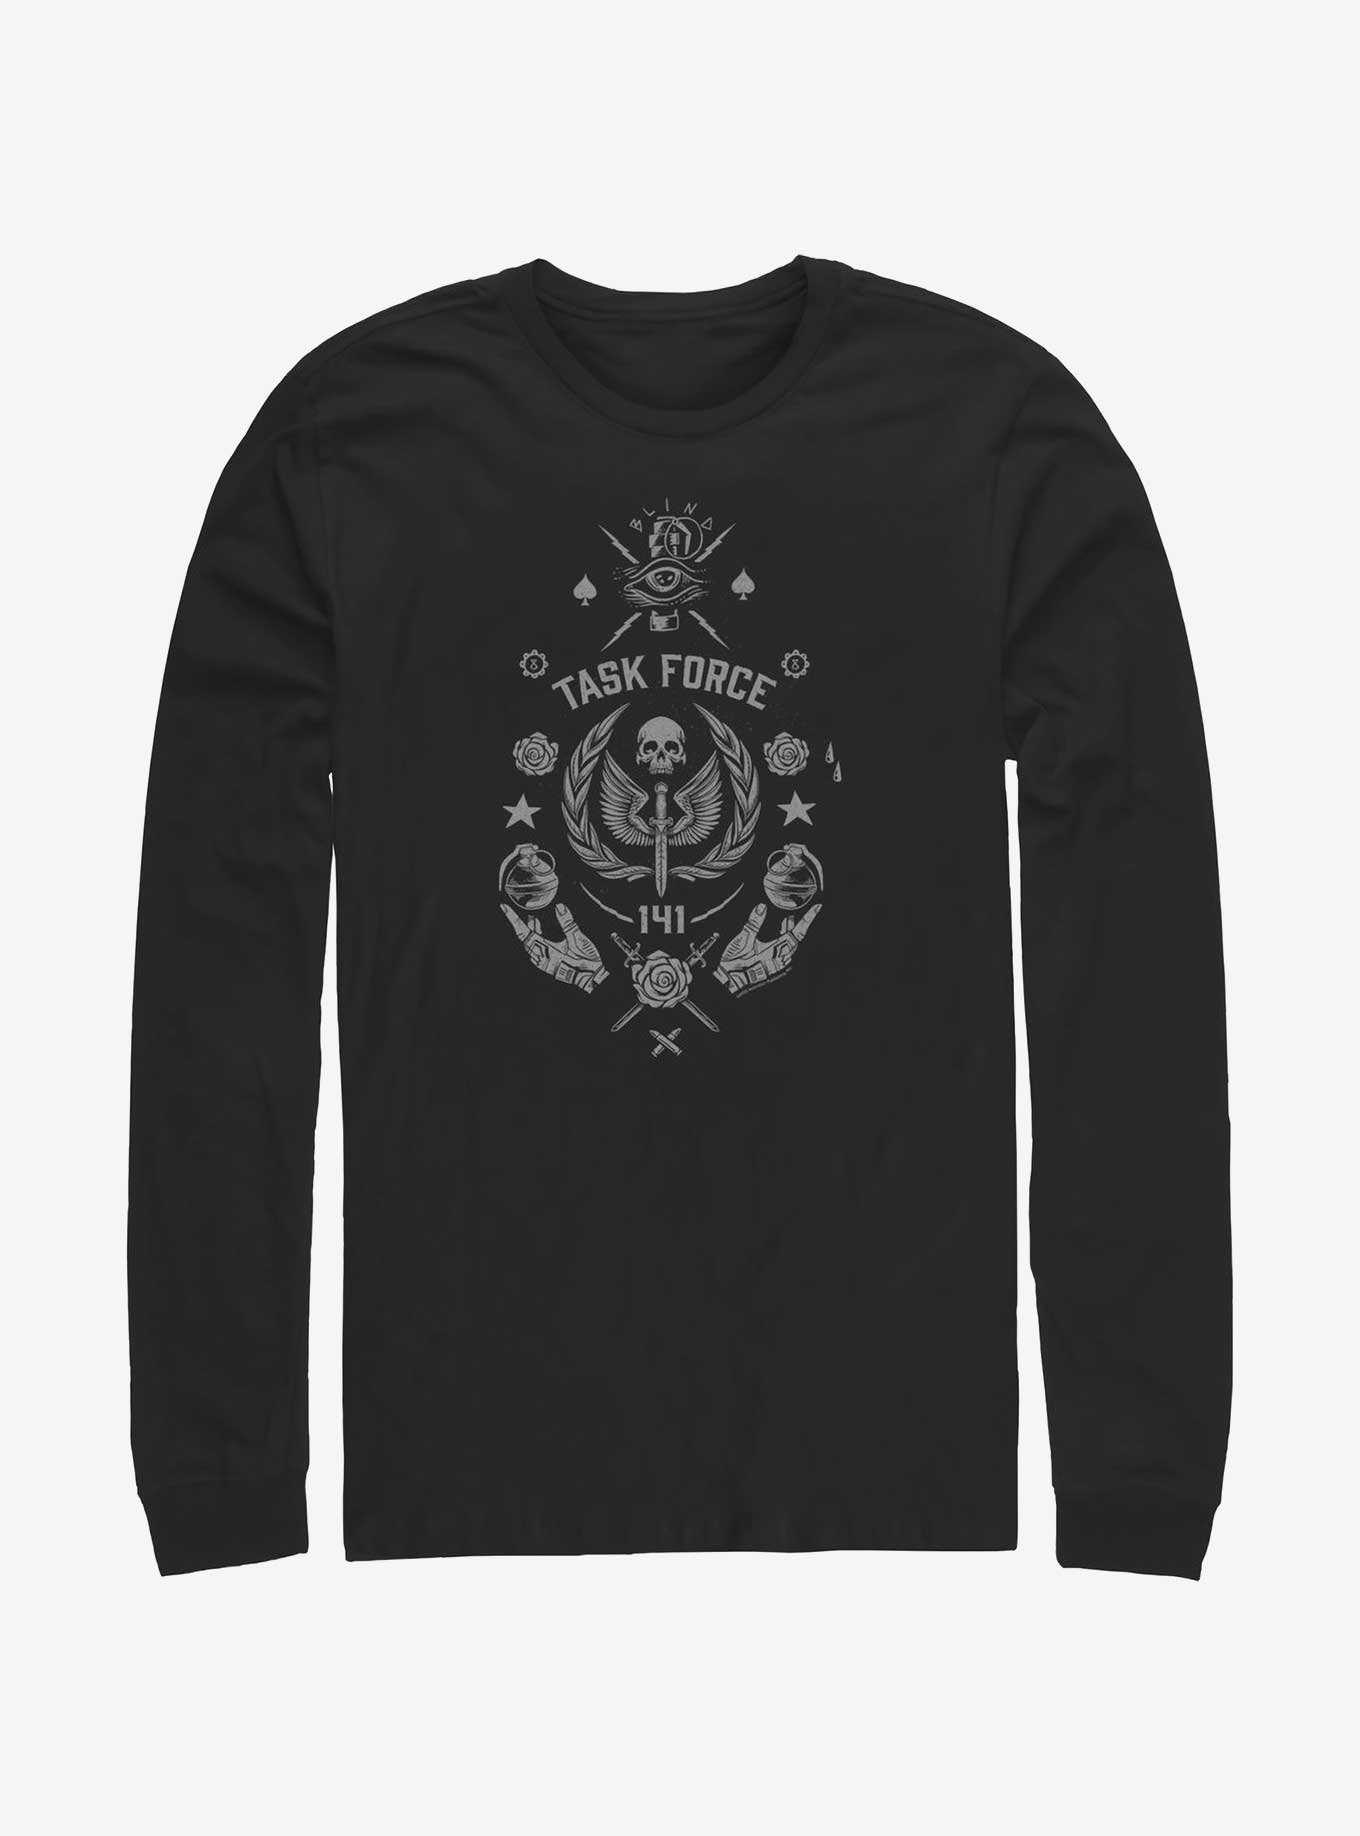 Call of Duty Task Force 141 Icon Long-Sleeve T-Shirt, , hi-res